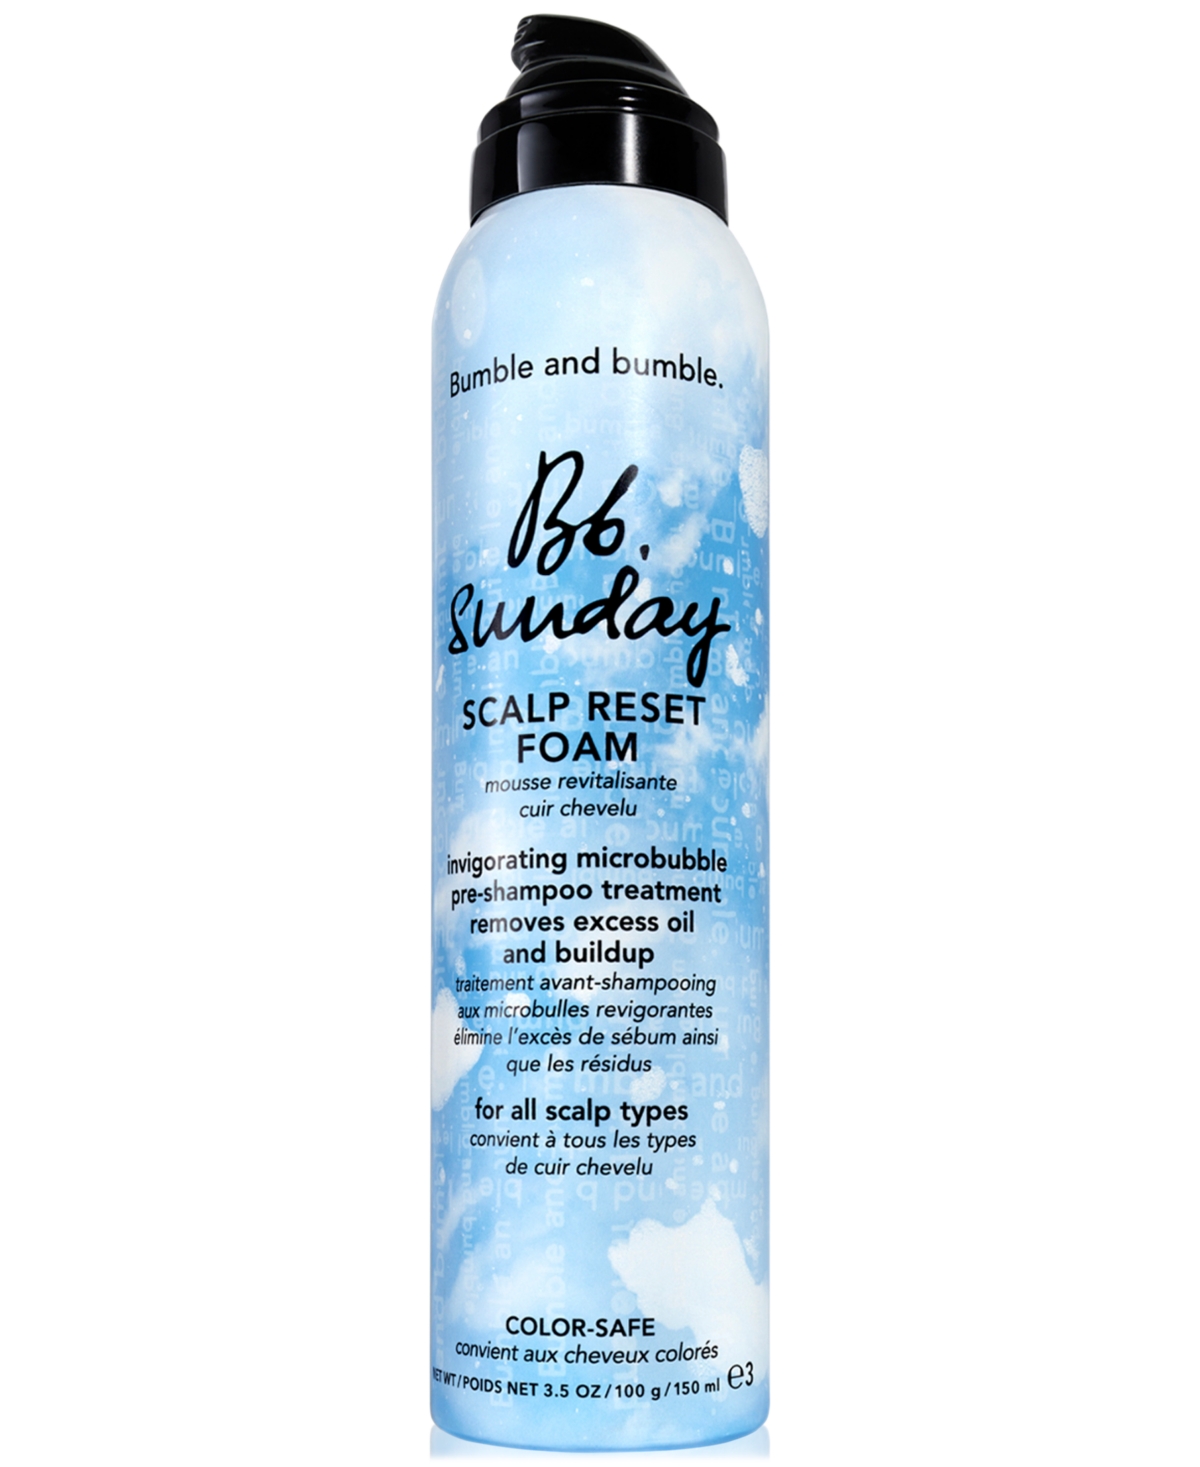 Bumble And Bumble Sunday Scalp Reset Foam, 3.5oz. In No Color